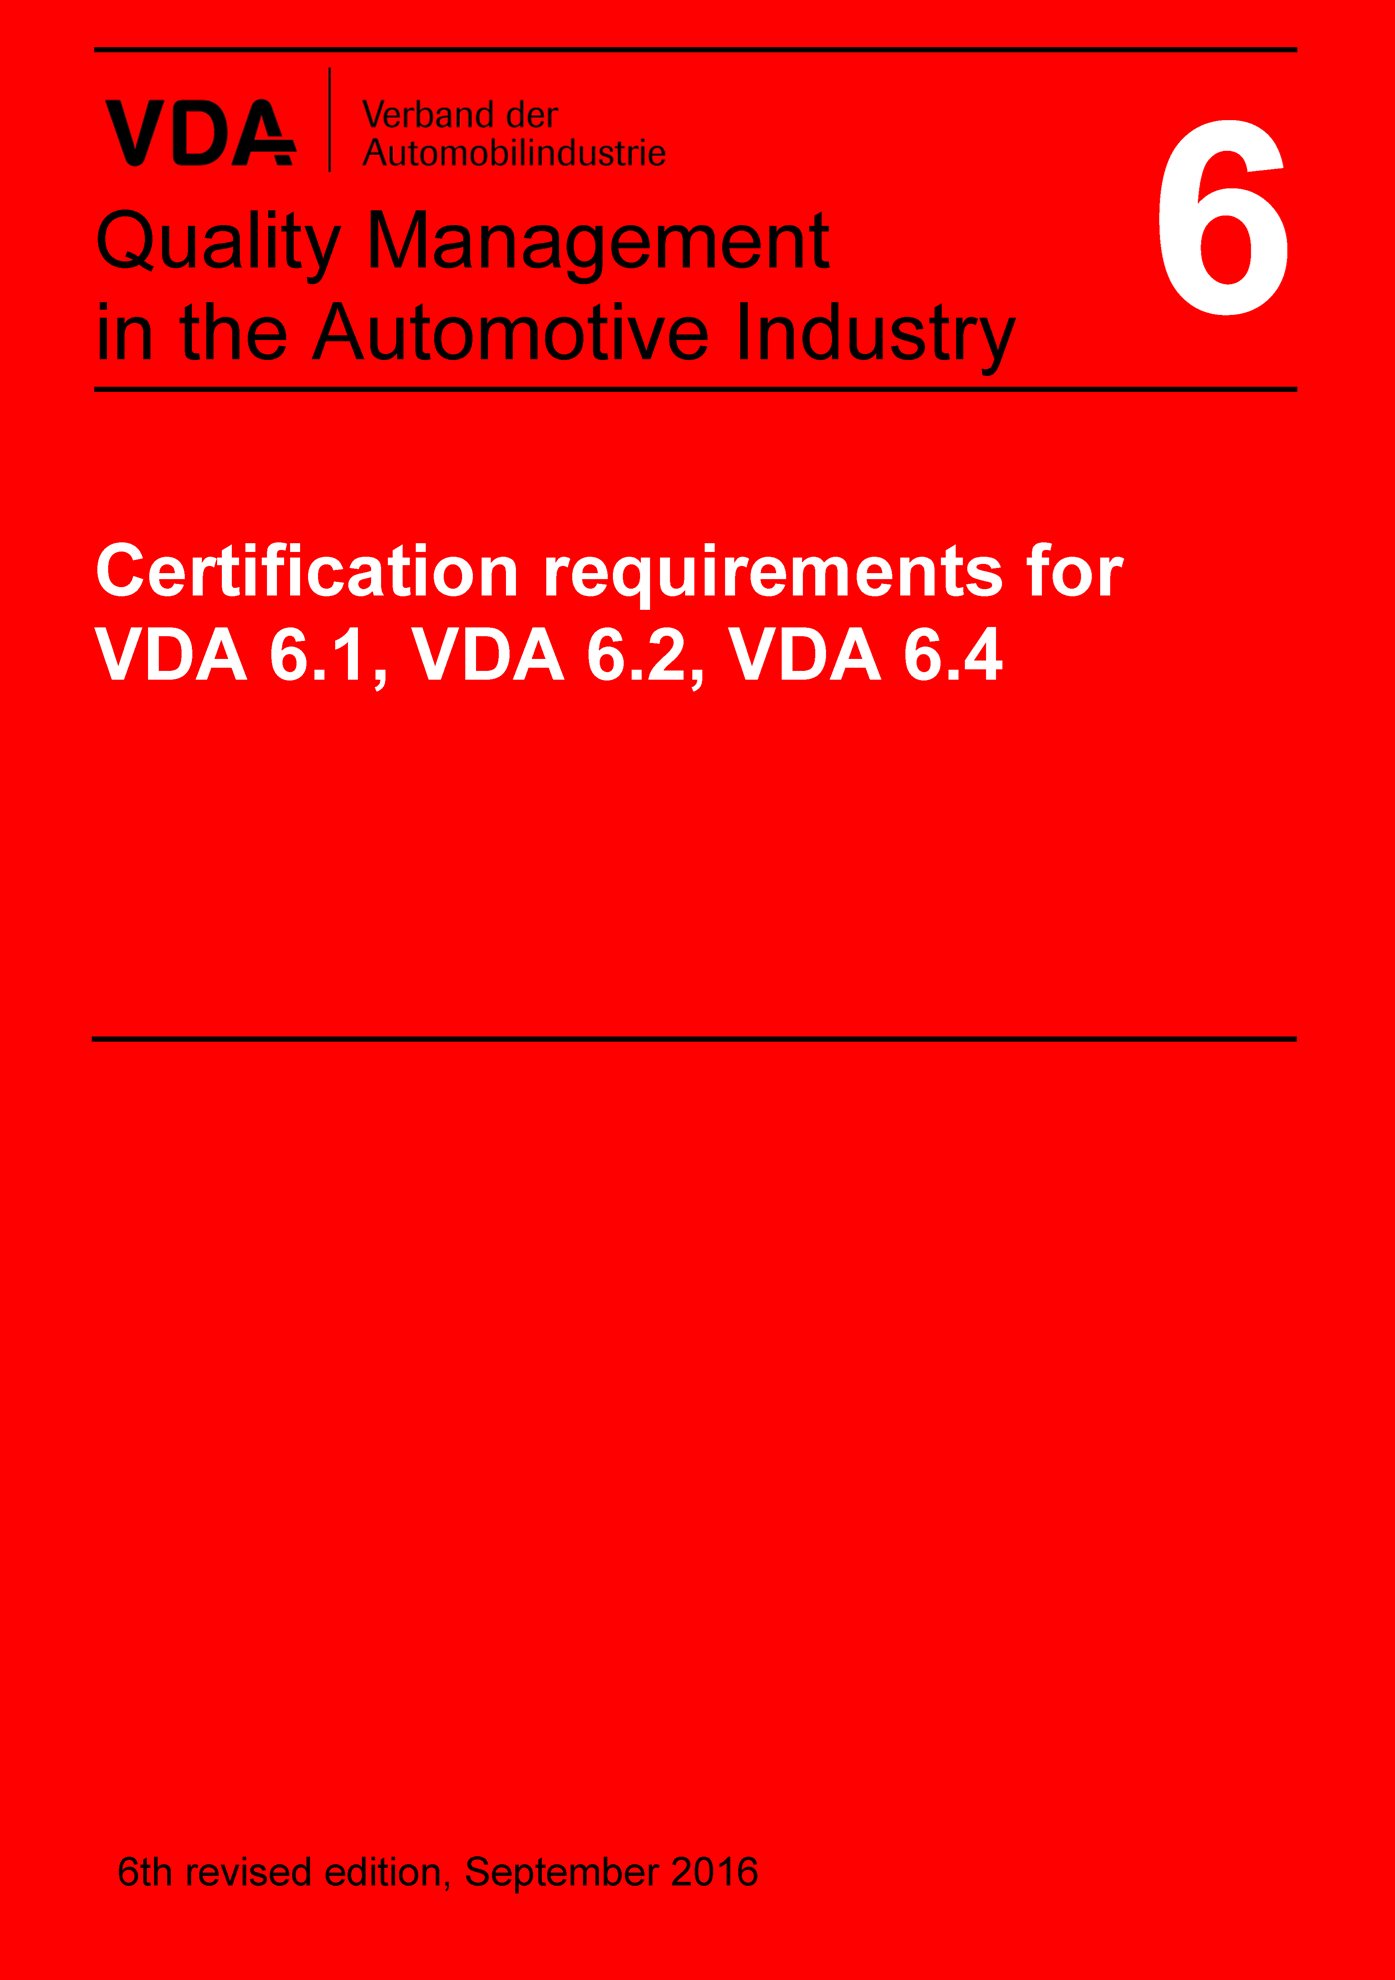 Publications  VDA Volume 6 Certification Requirements for VDA 6.1, VDA 6.2 and VDA 6.4
 6th revised edition, September 2016
 (English edition published 2017/09) 1.9.2016 preview